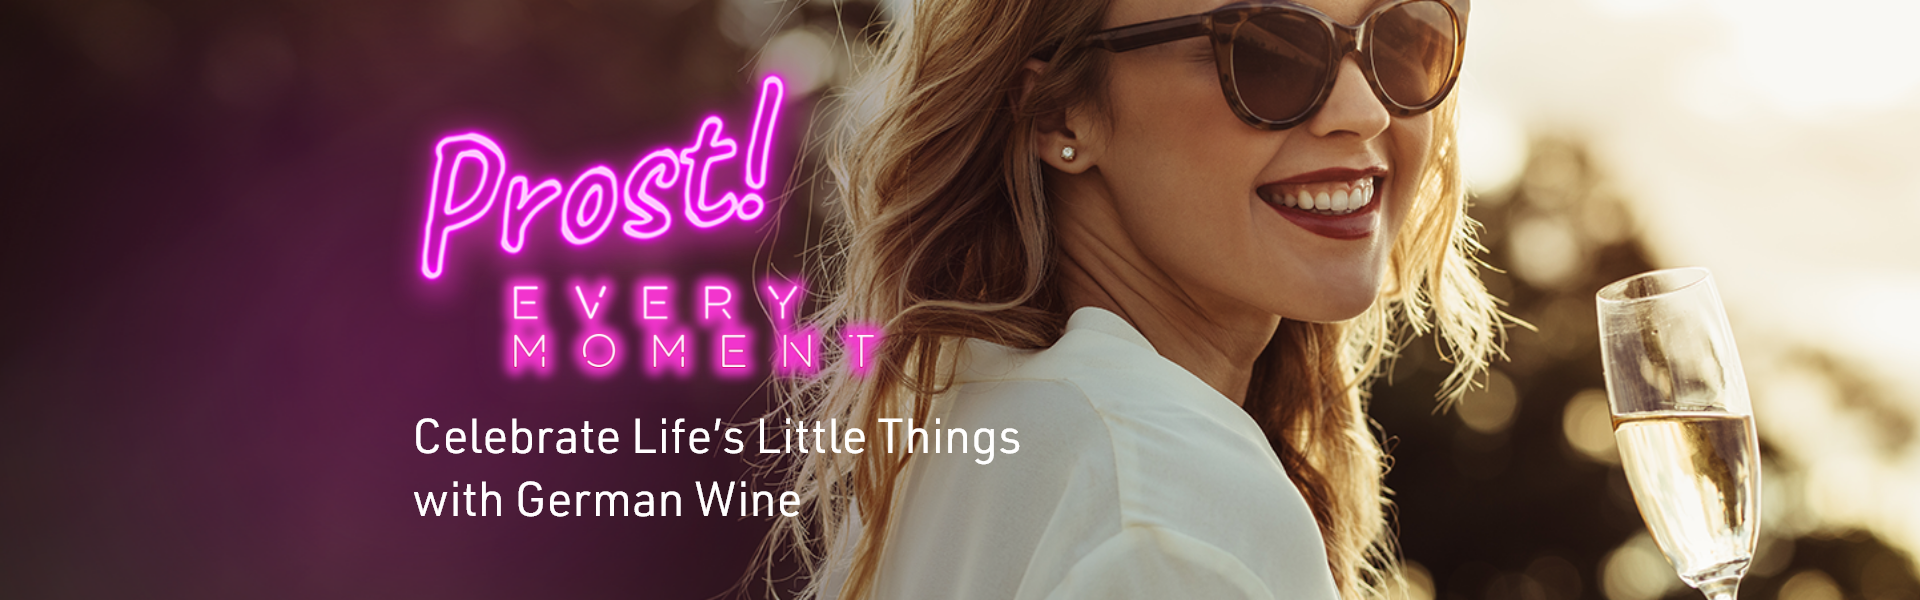 Prost! Every Moment - Celebrate Life's Little Things with German WIne